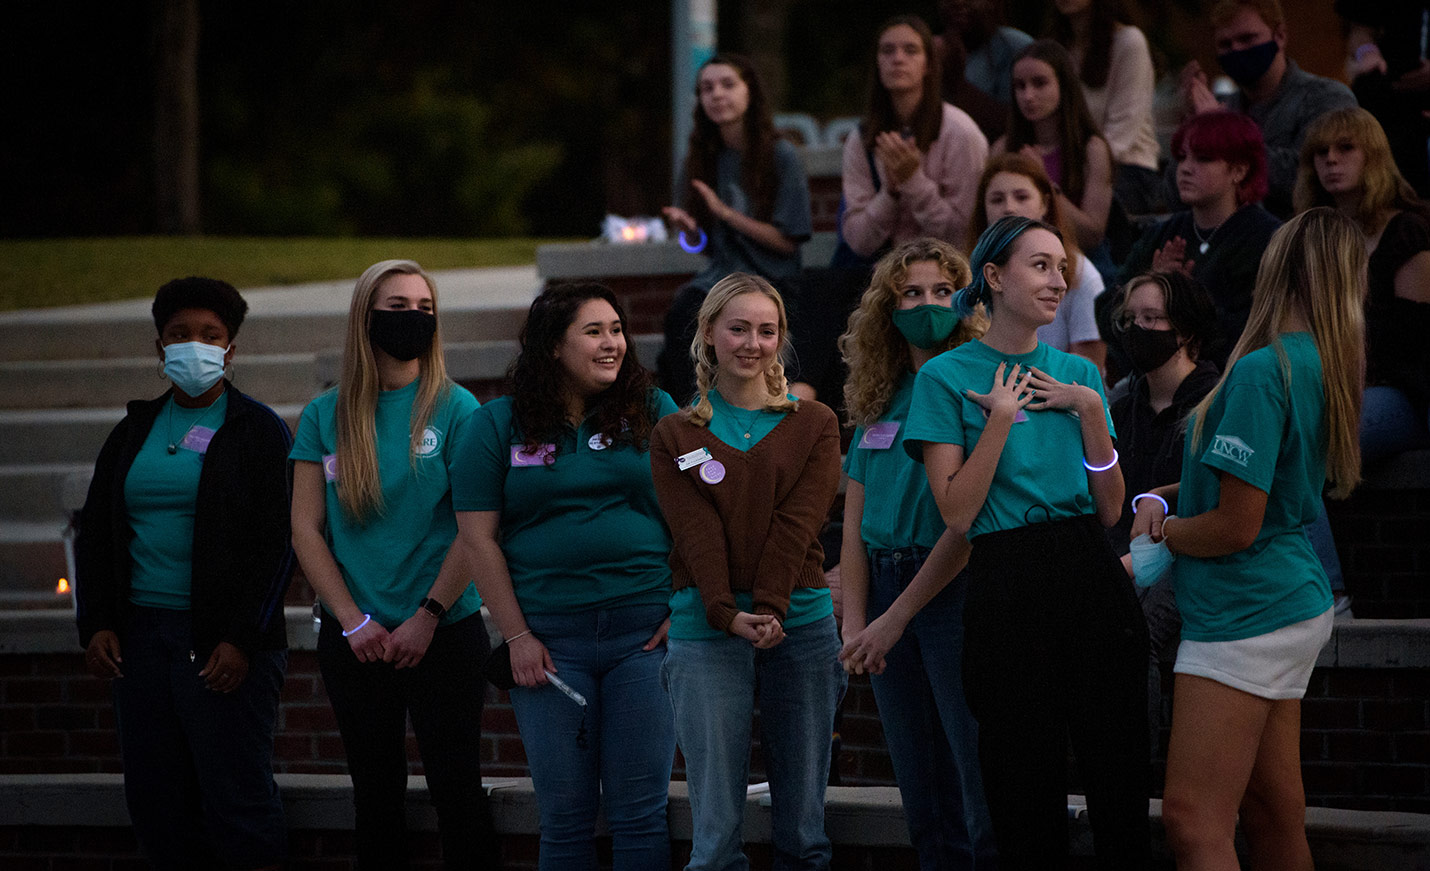 A group of women in UNCW attire, some masked, listen while another woman shares her thoughts